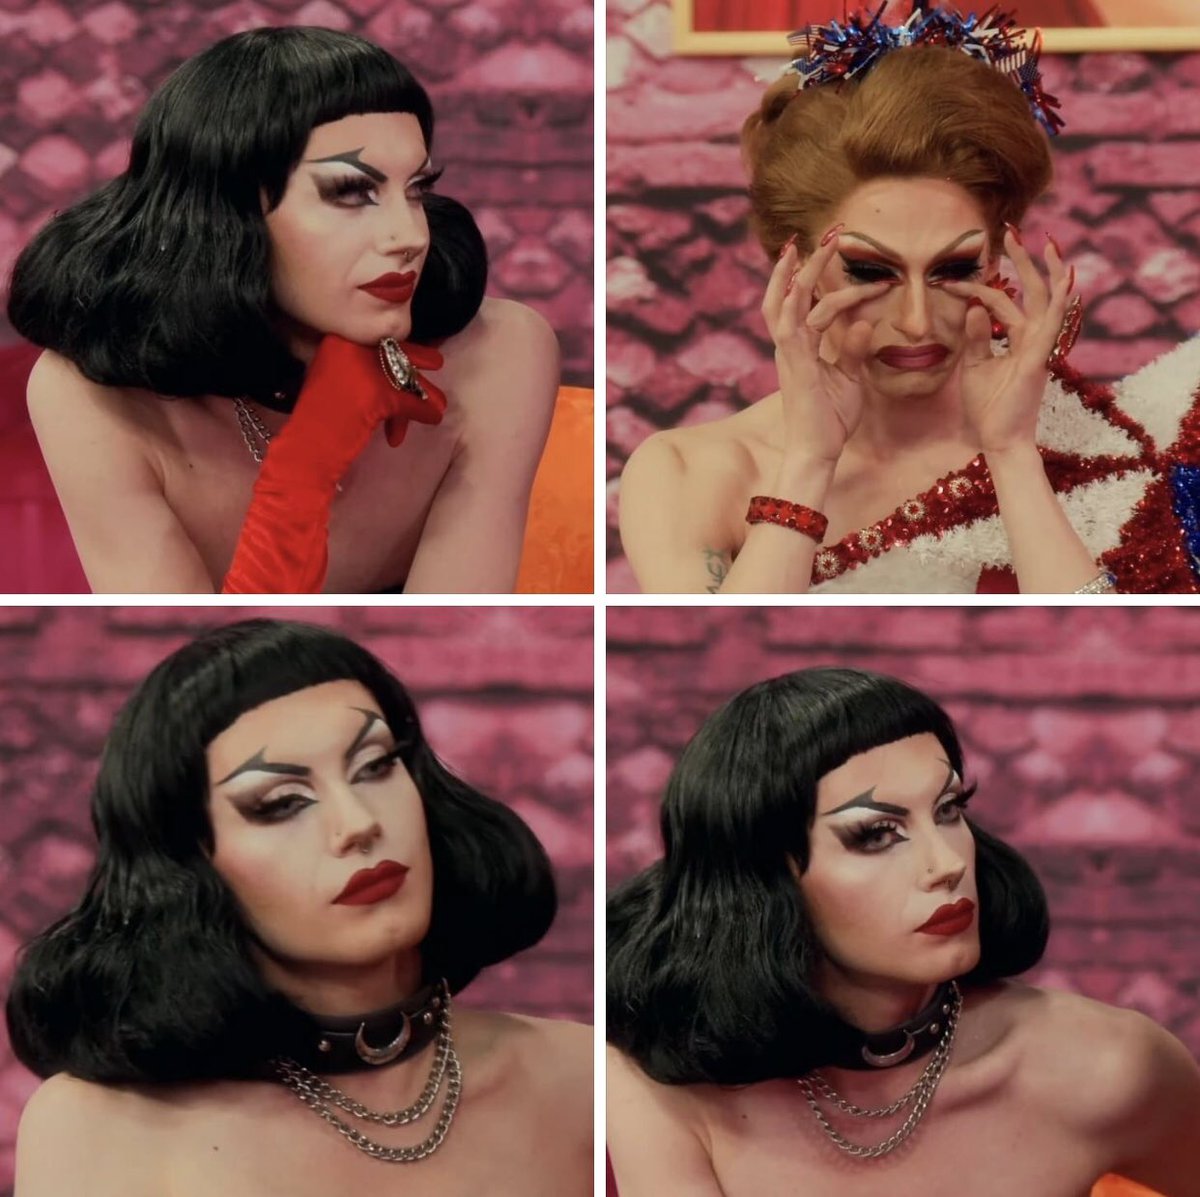 RT @valcreador: The fact that they’re BOTH GEMINIS is KILLING ME 🤣❤️ @hereisbosco @jasminekennedie #dragrace https://t.co/5z5F8dMyyB